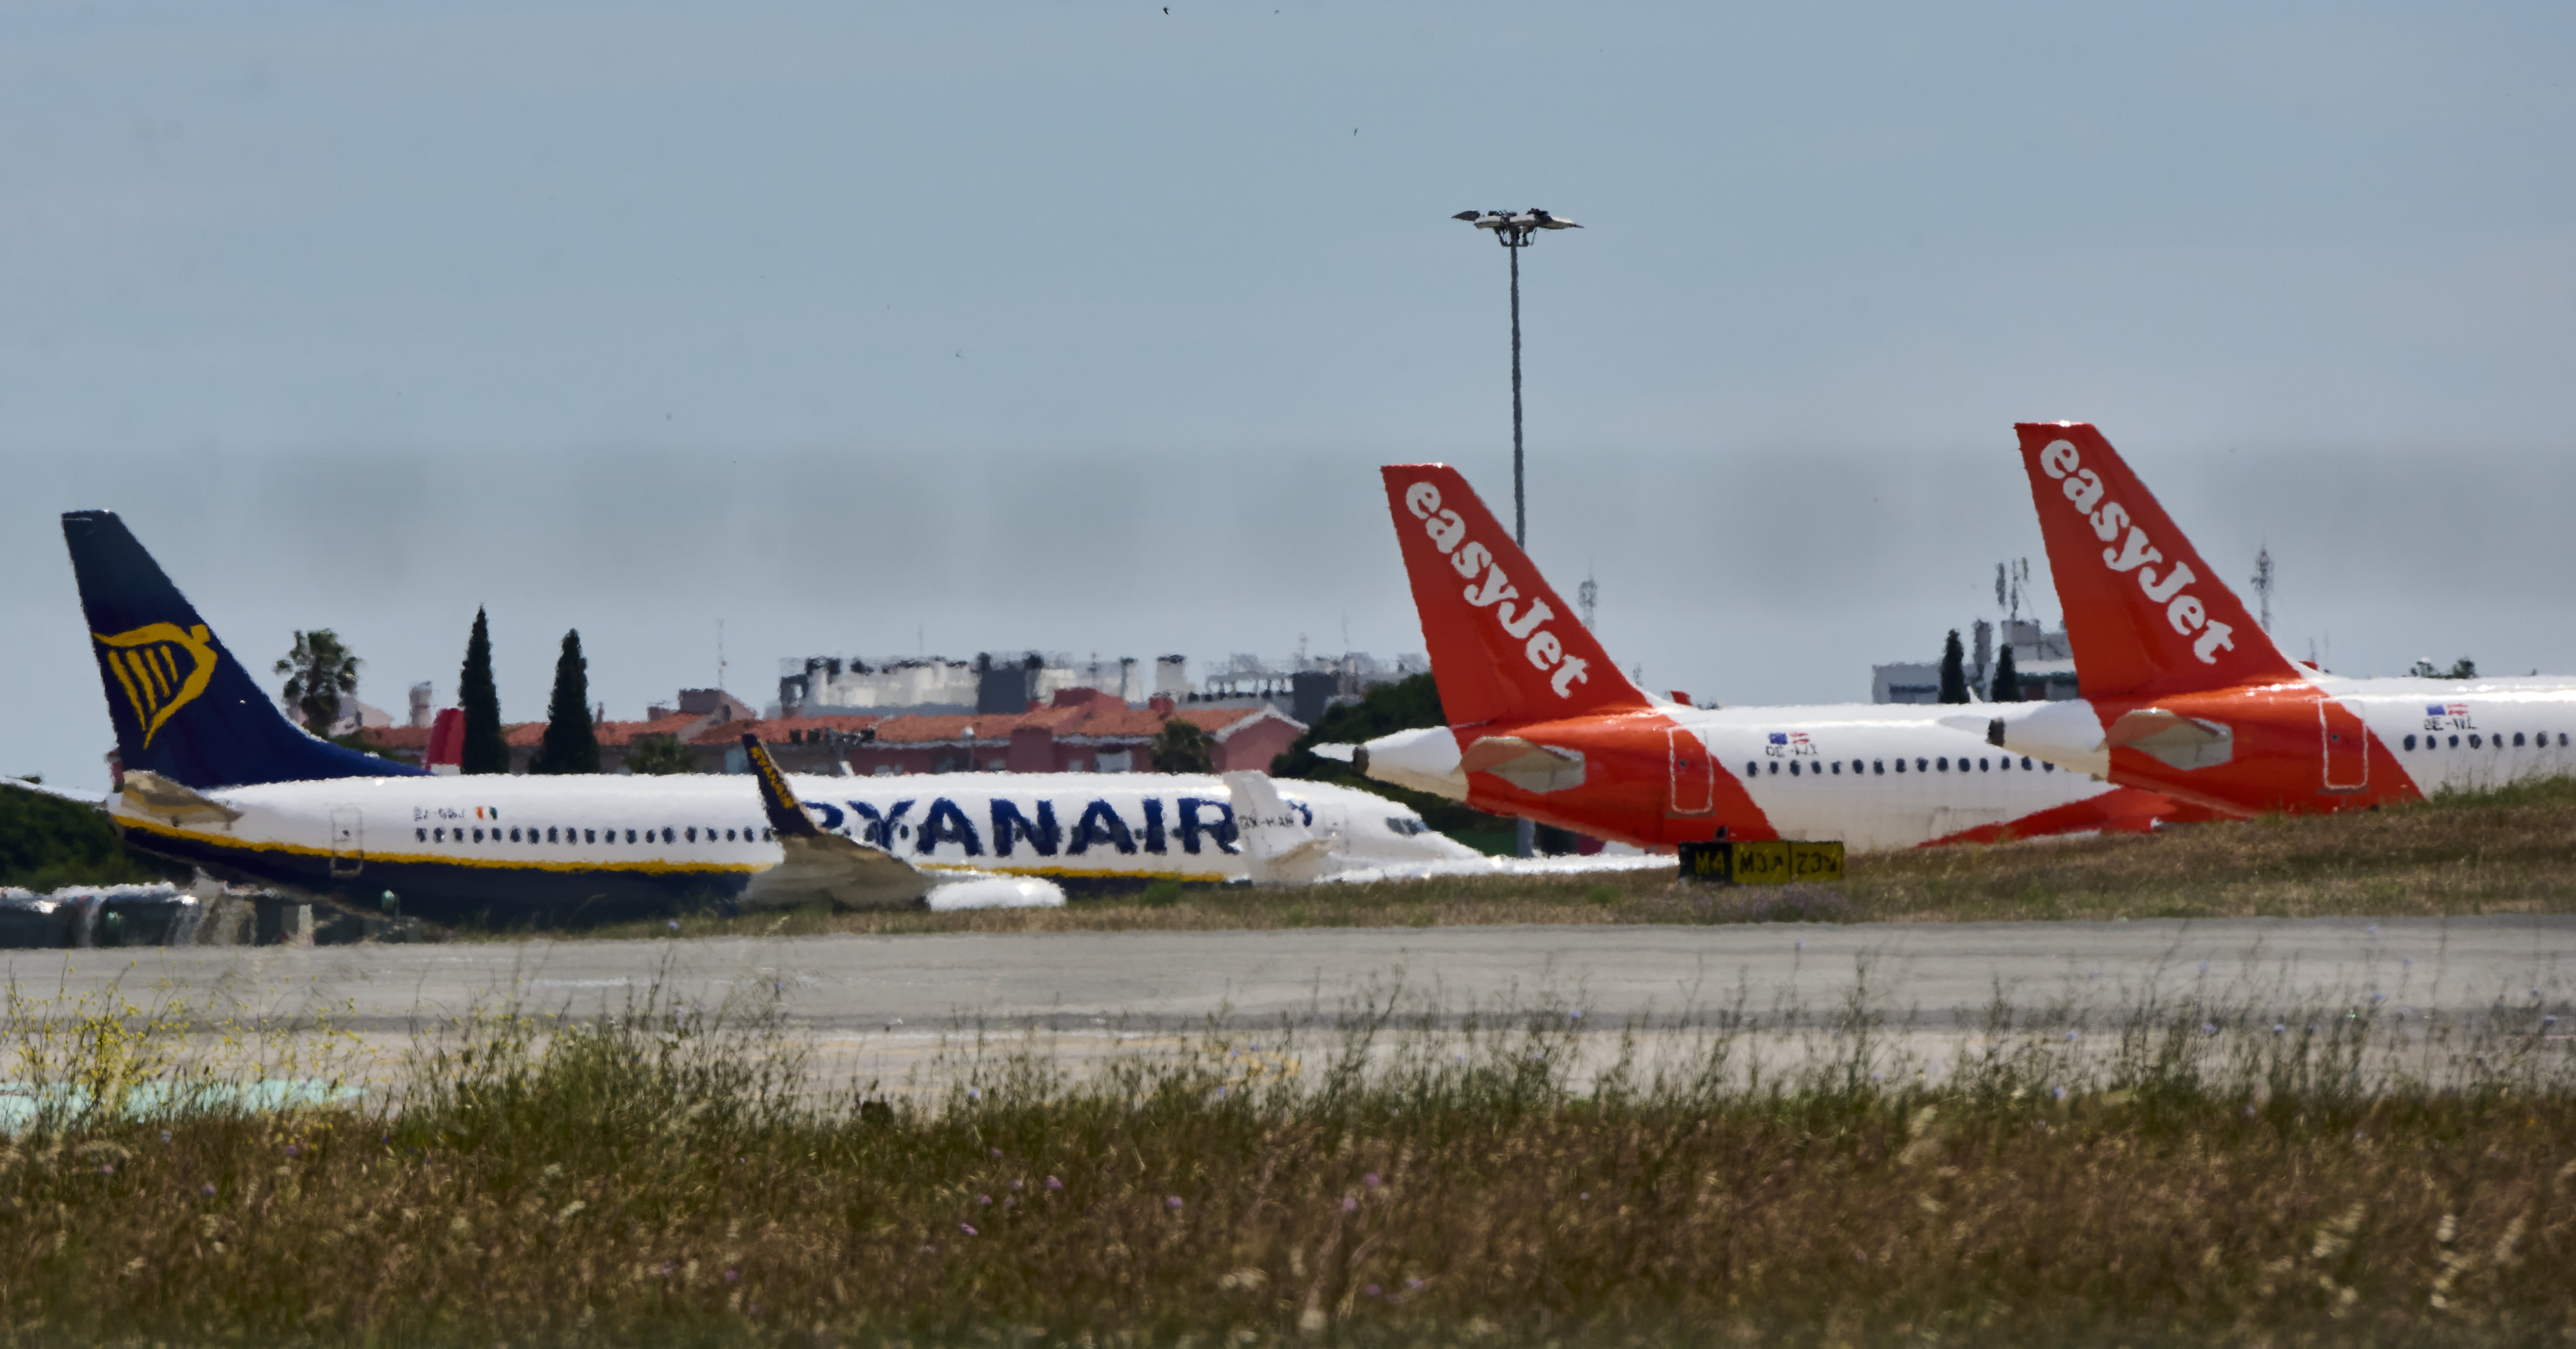 Europe's low-cost airlines could have the edge in a post-Covid world - CNBC